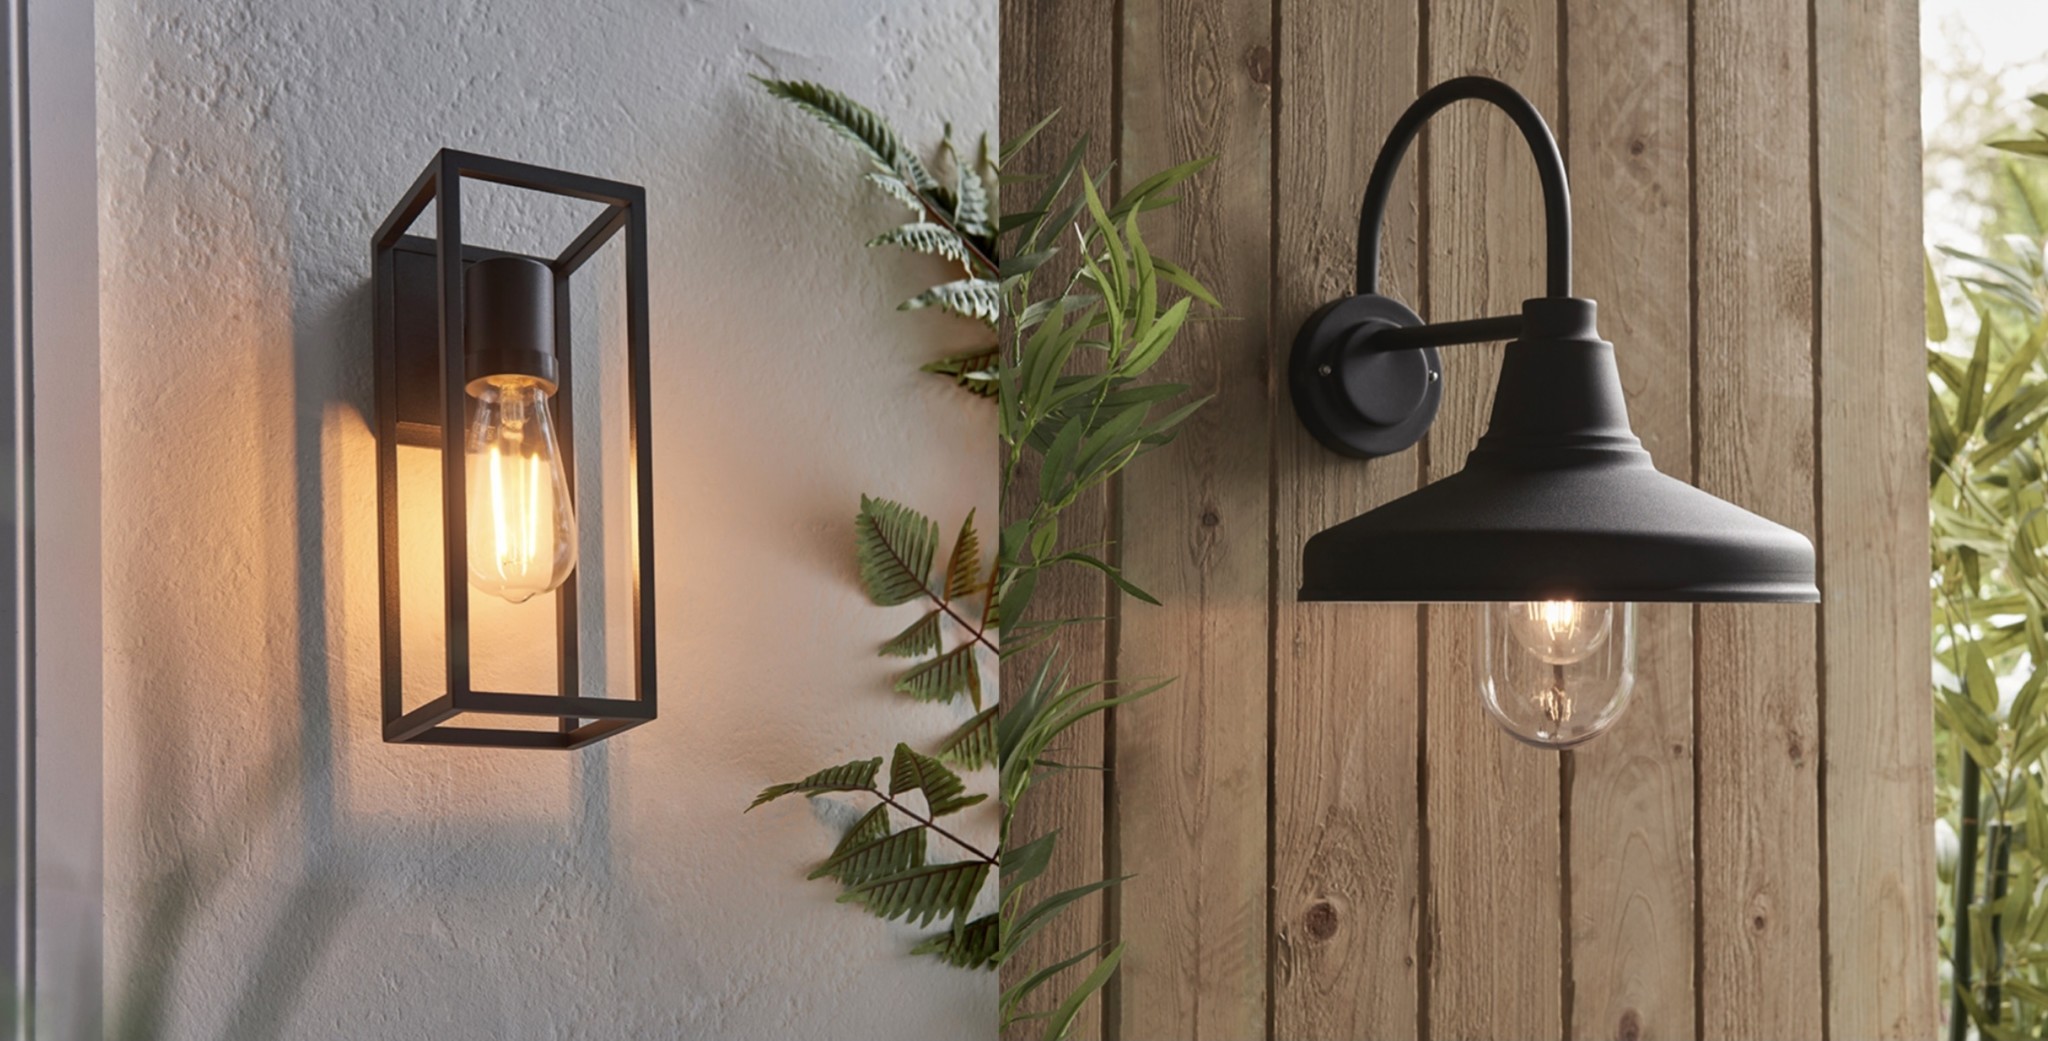 Classic outdoor wall lights